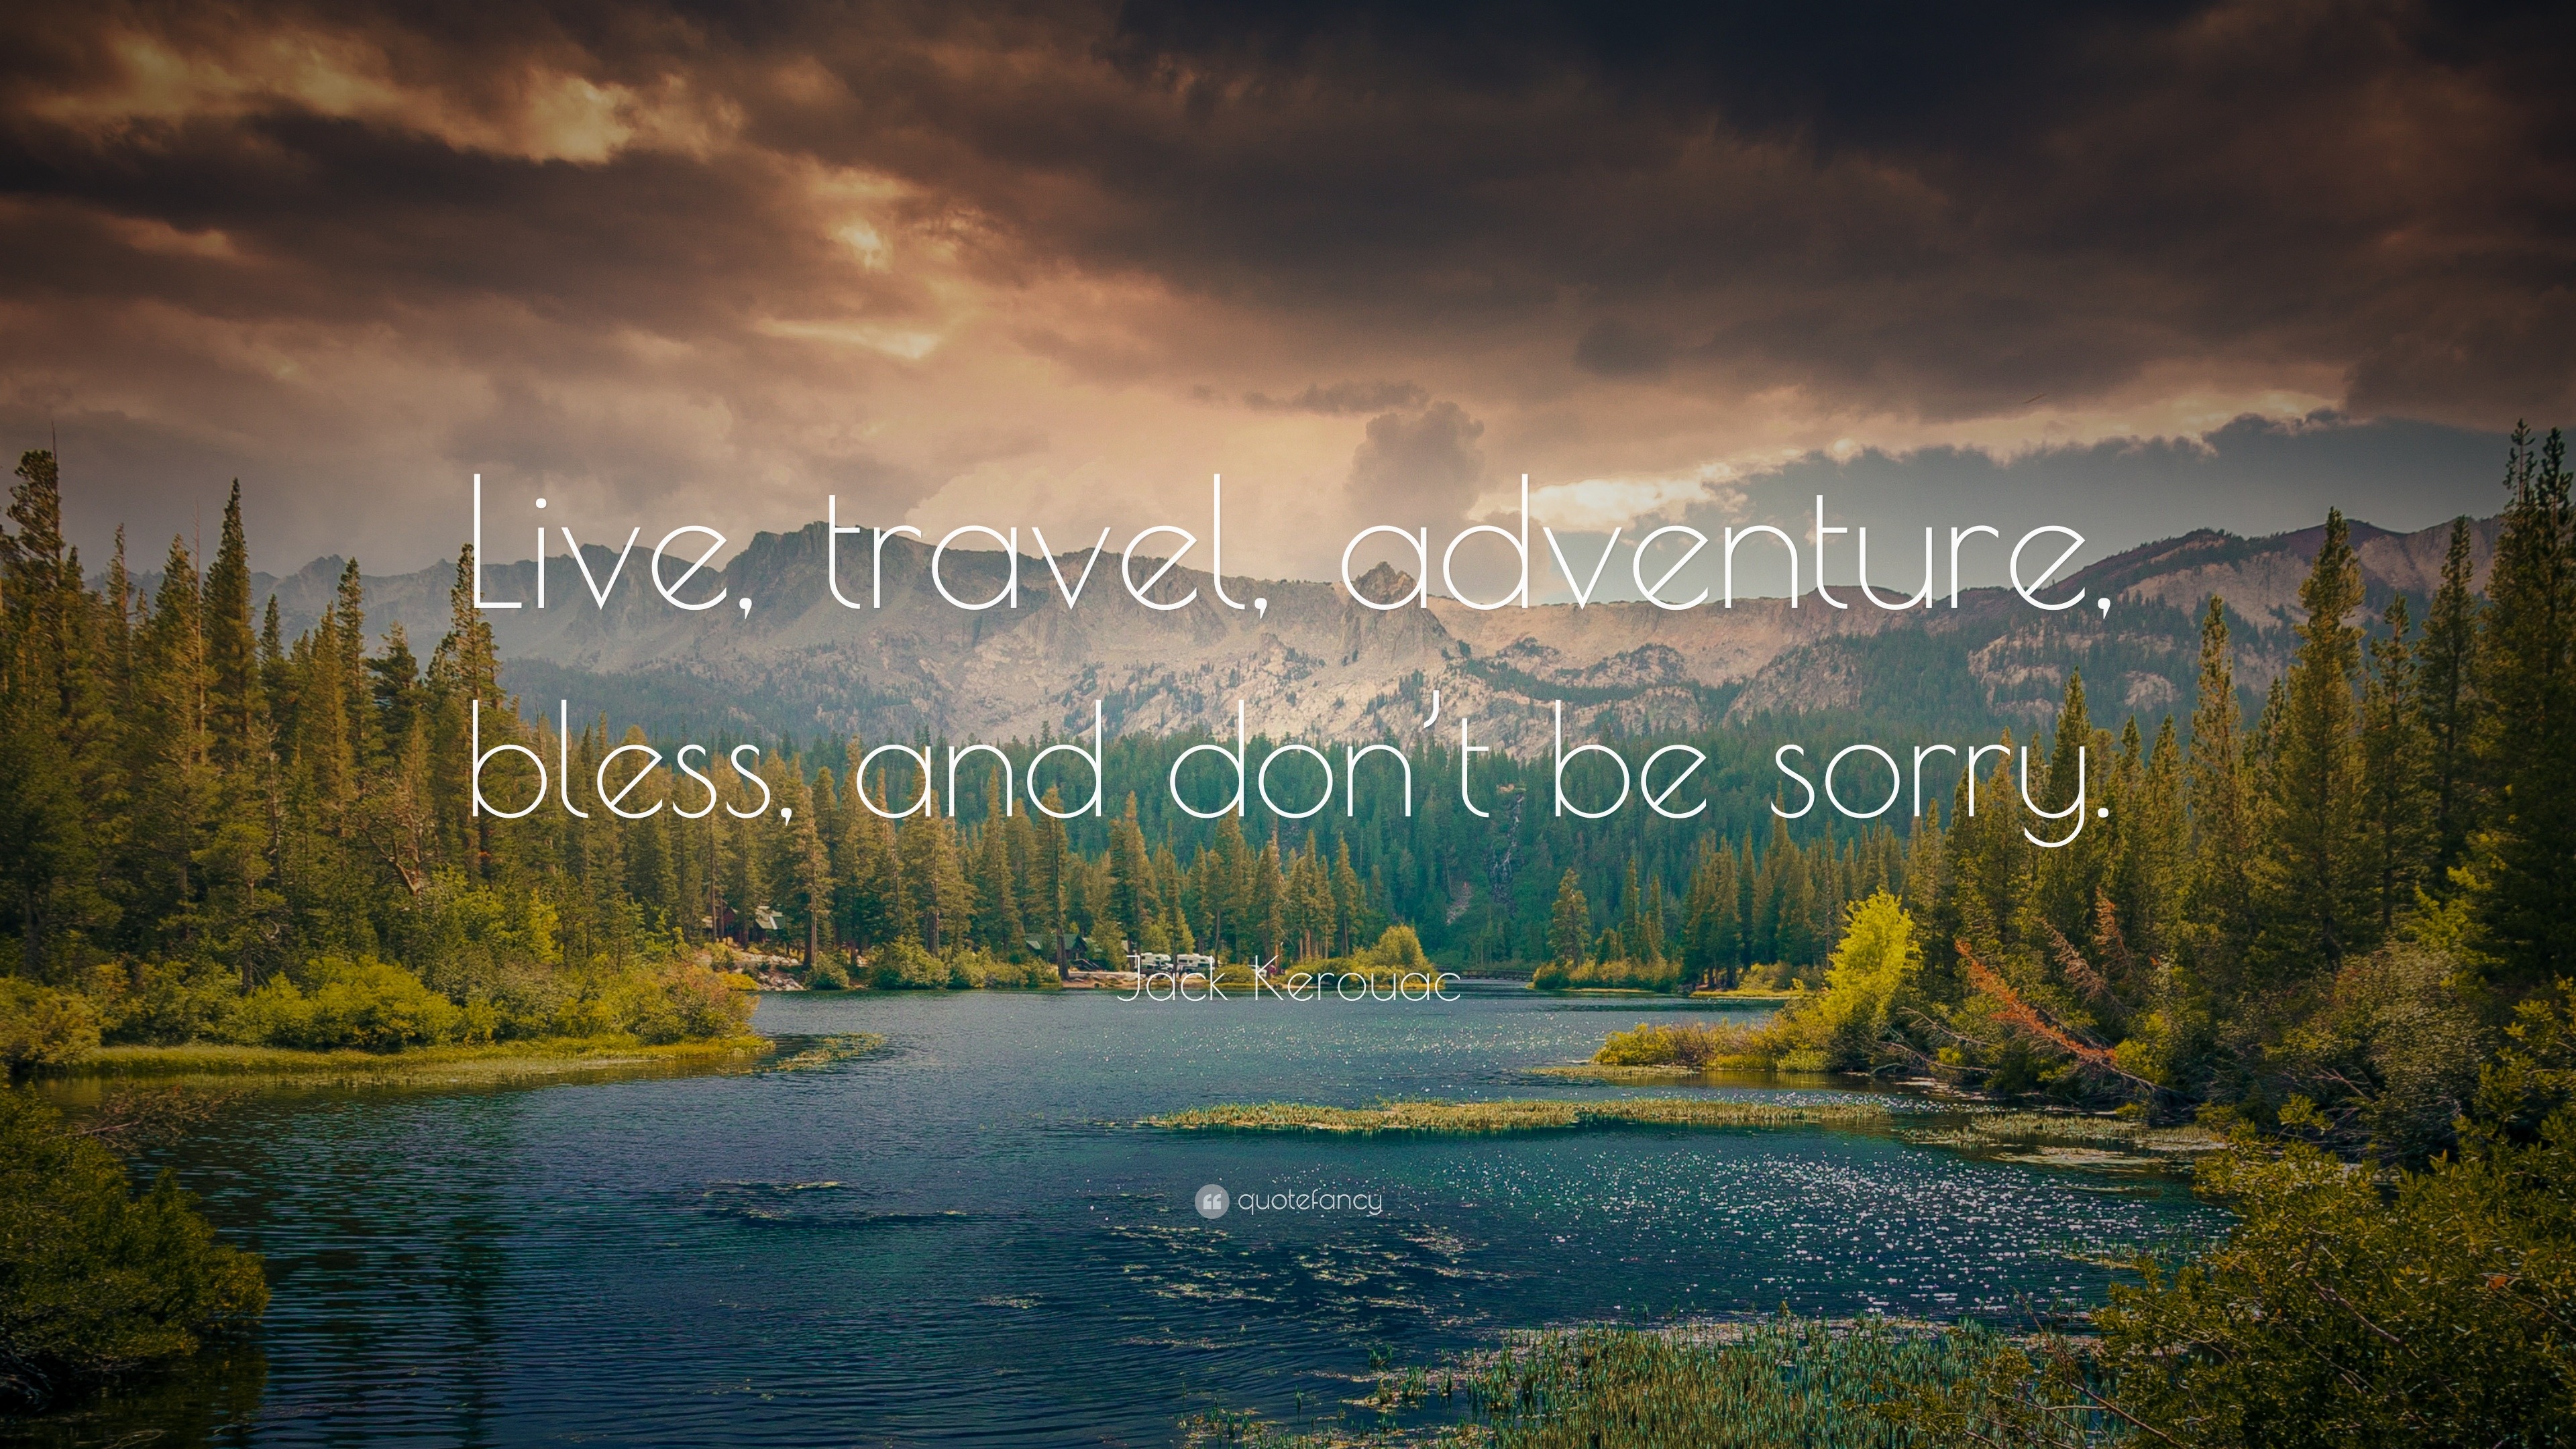 Jack Kerouac Quote: “Live, travel, adventure, bless, and don’t be sorry.”